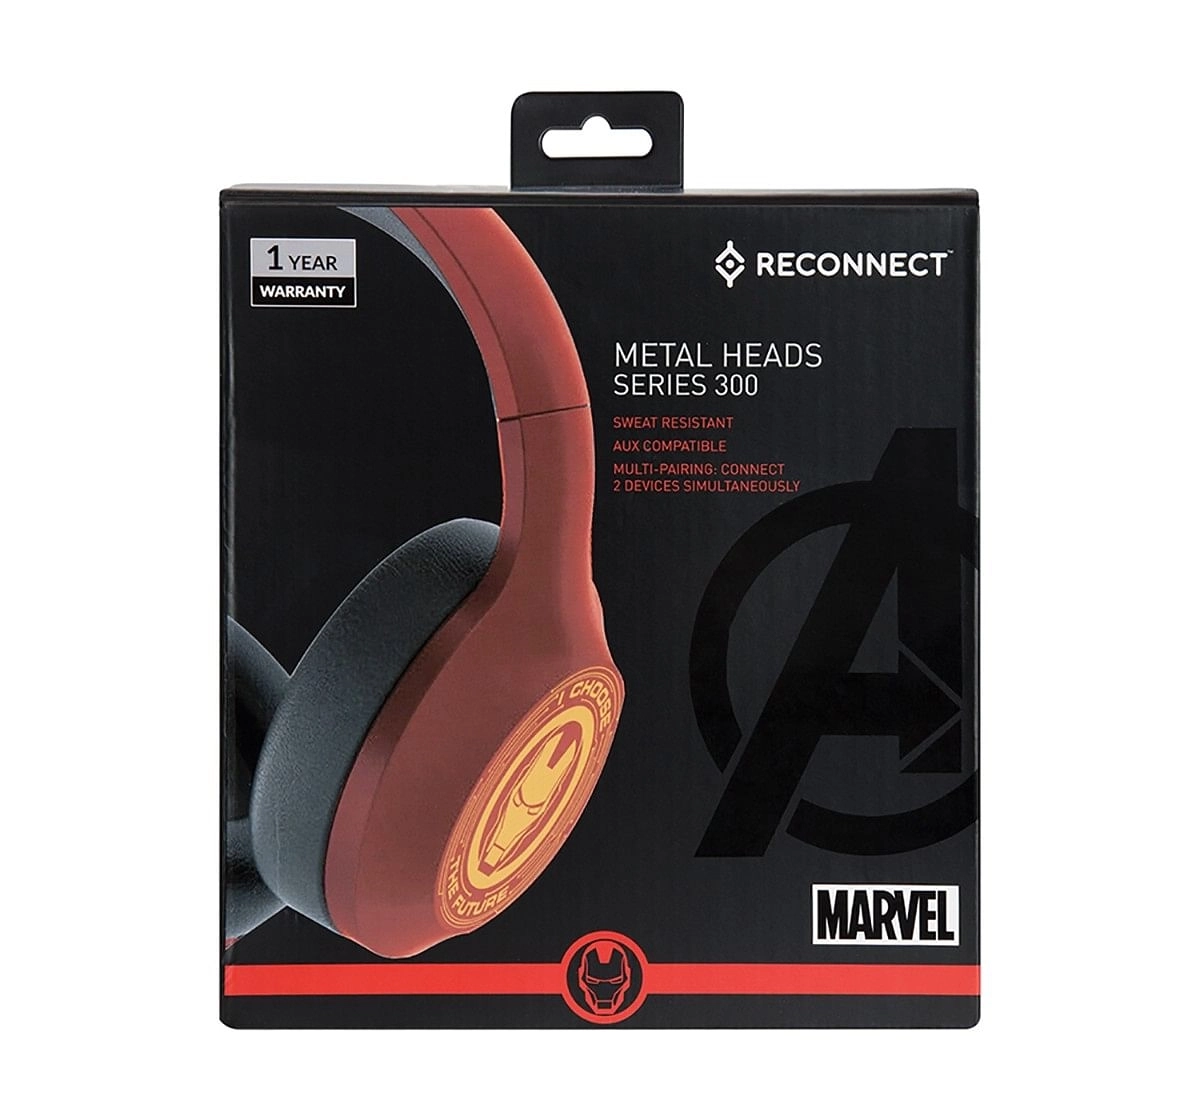  Disney Reconnect WL Headphone OVE DBTH303 IM Electronics Accessories for Kids age 13Y+ 